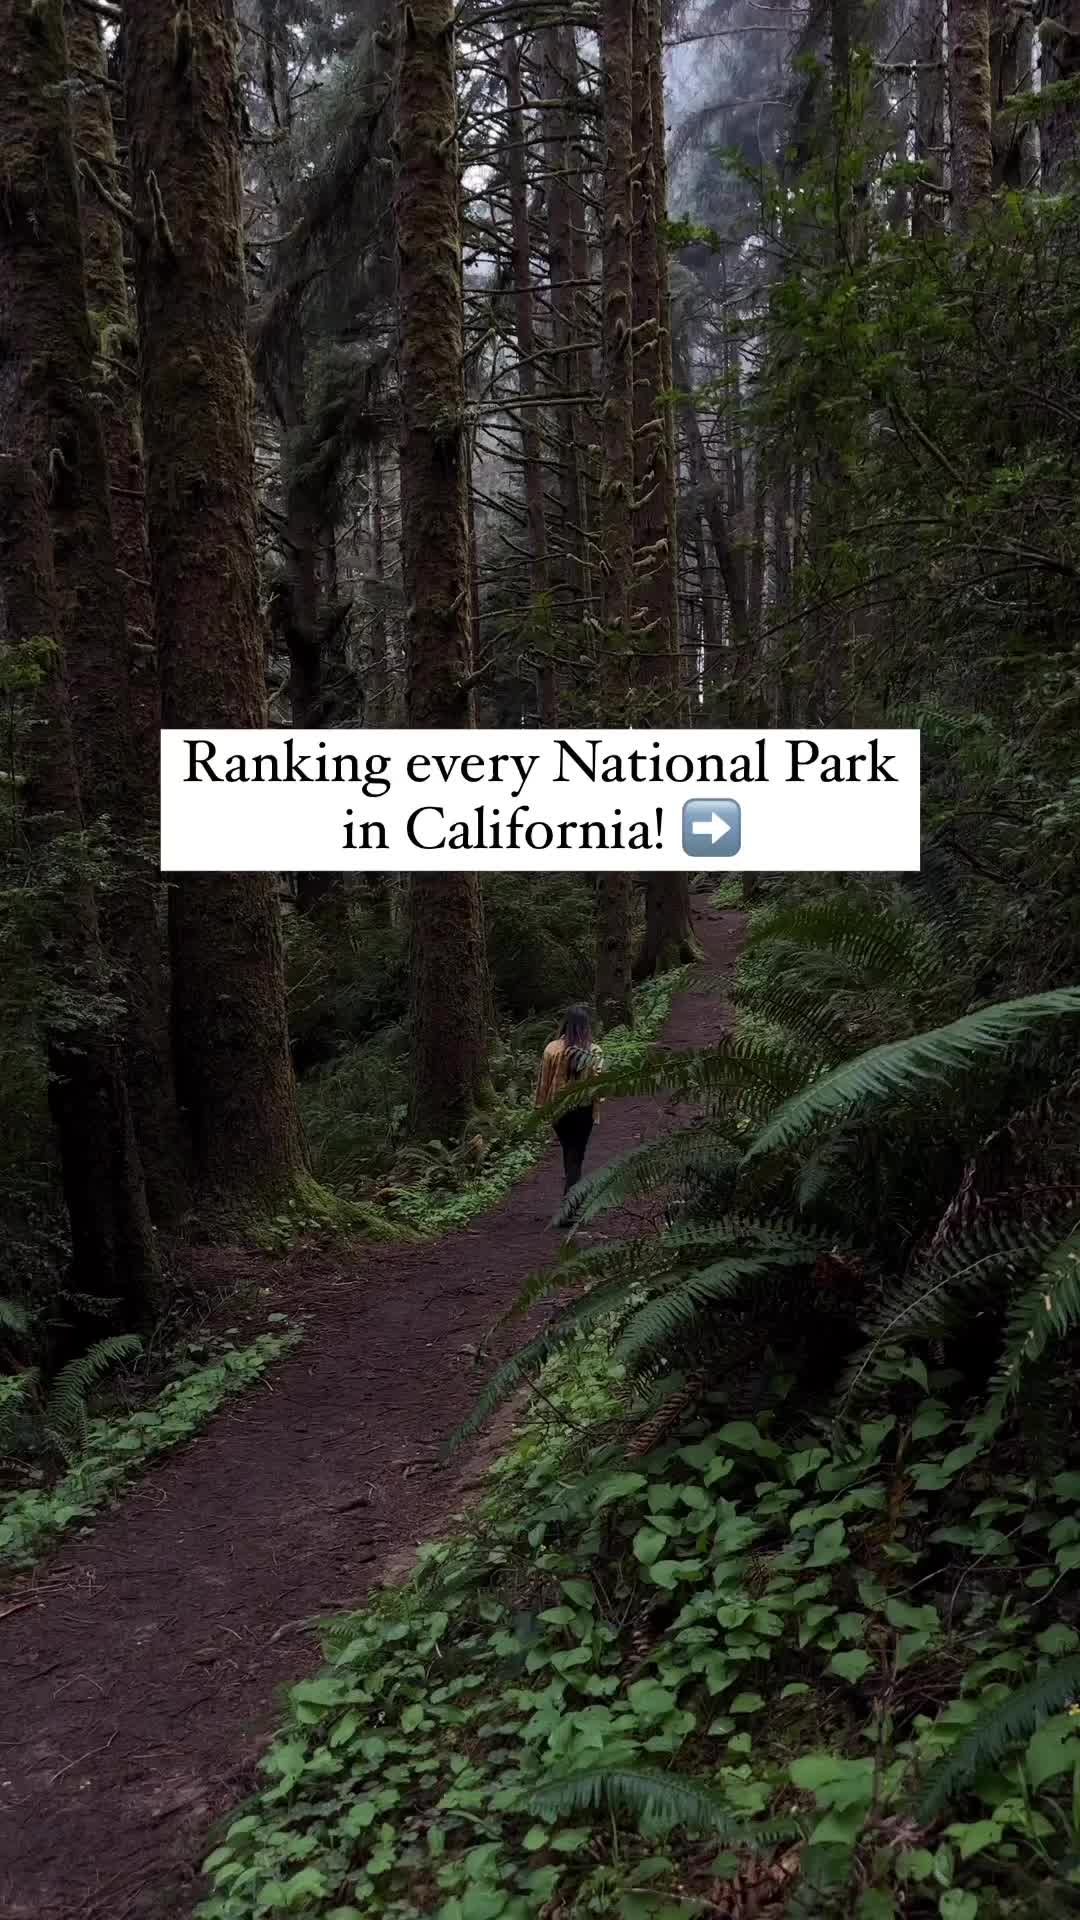 Top 3 Favorite National Parks in California Revealed!